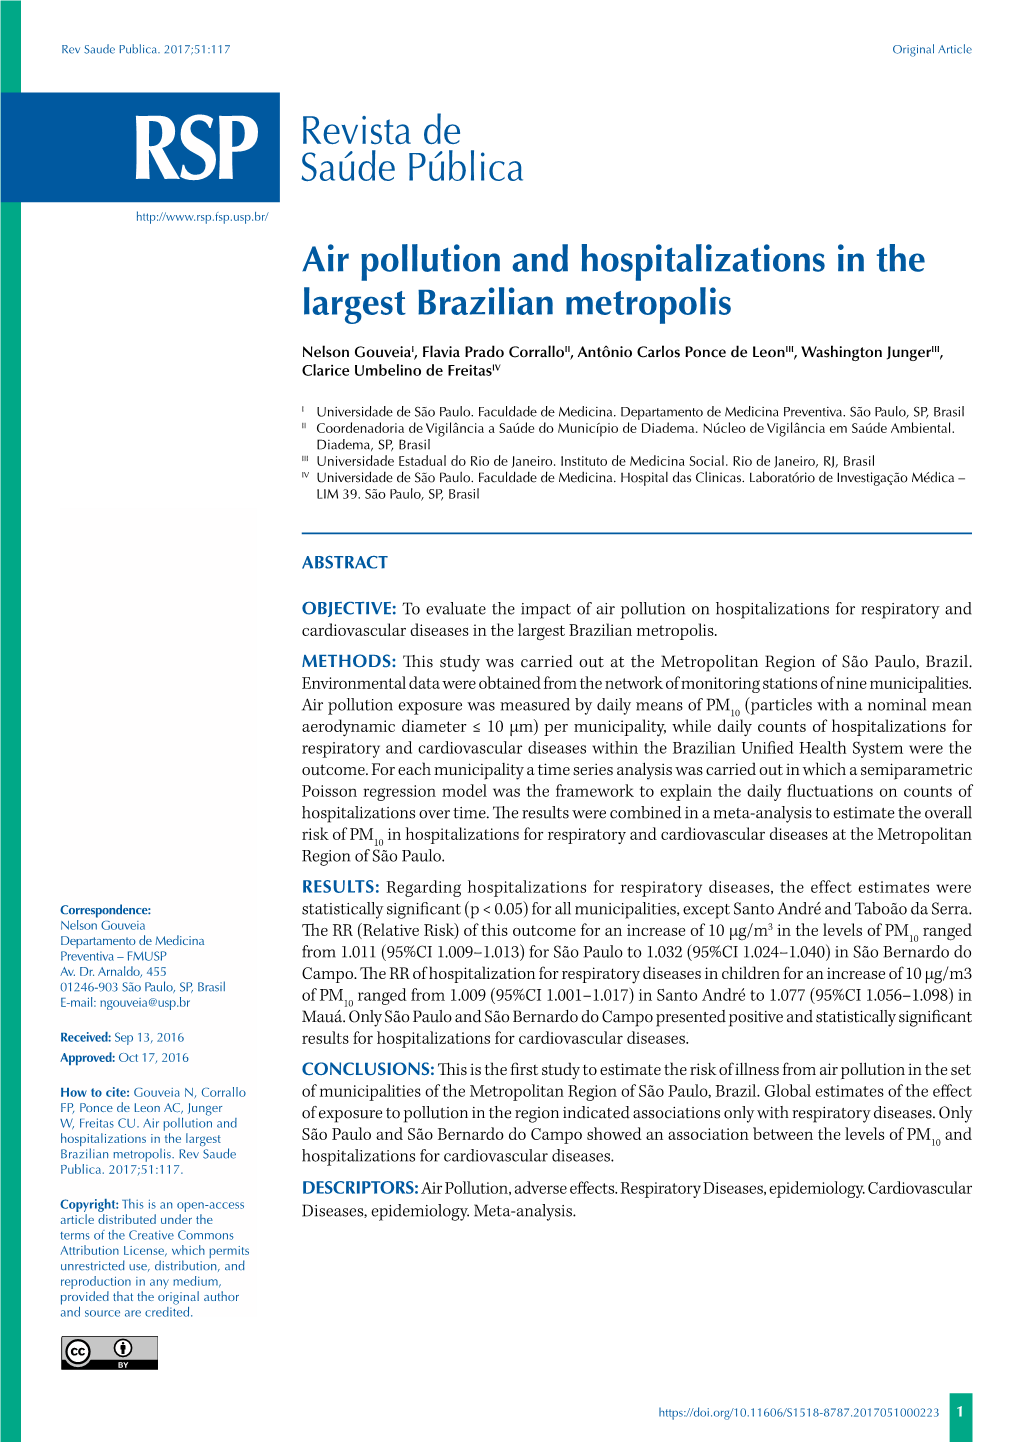 Air Pollution and Hospitalizations in the Largest Brazilian Metropolis